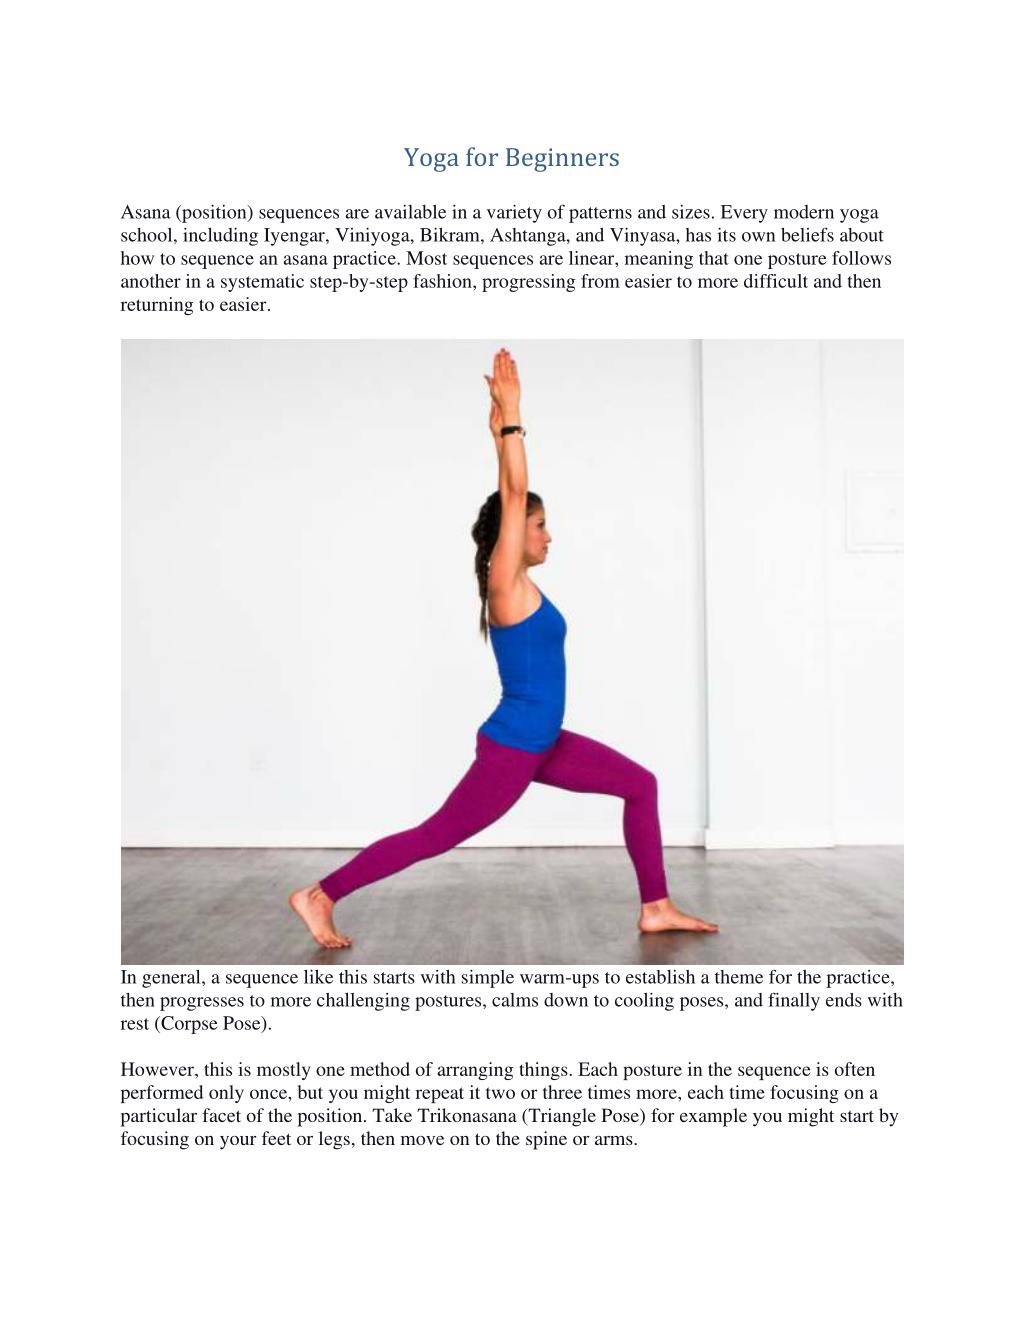 Carmen Lee-Schneider Yoga - 8 YOGA POSES TO RELIEVE LOWER BACK PAIN If your  lower back pain is more of a general achiness or discomfort, it's worth  trying some yoga stretches to